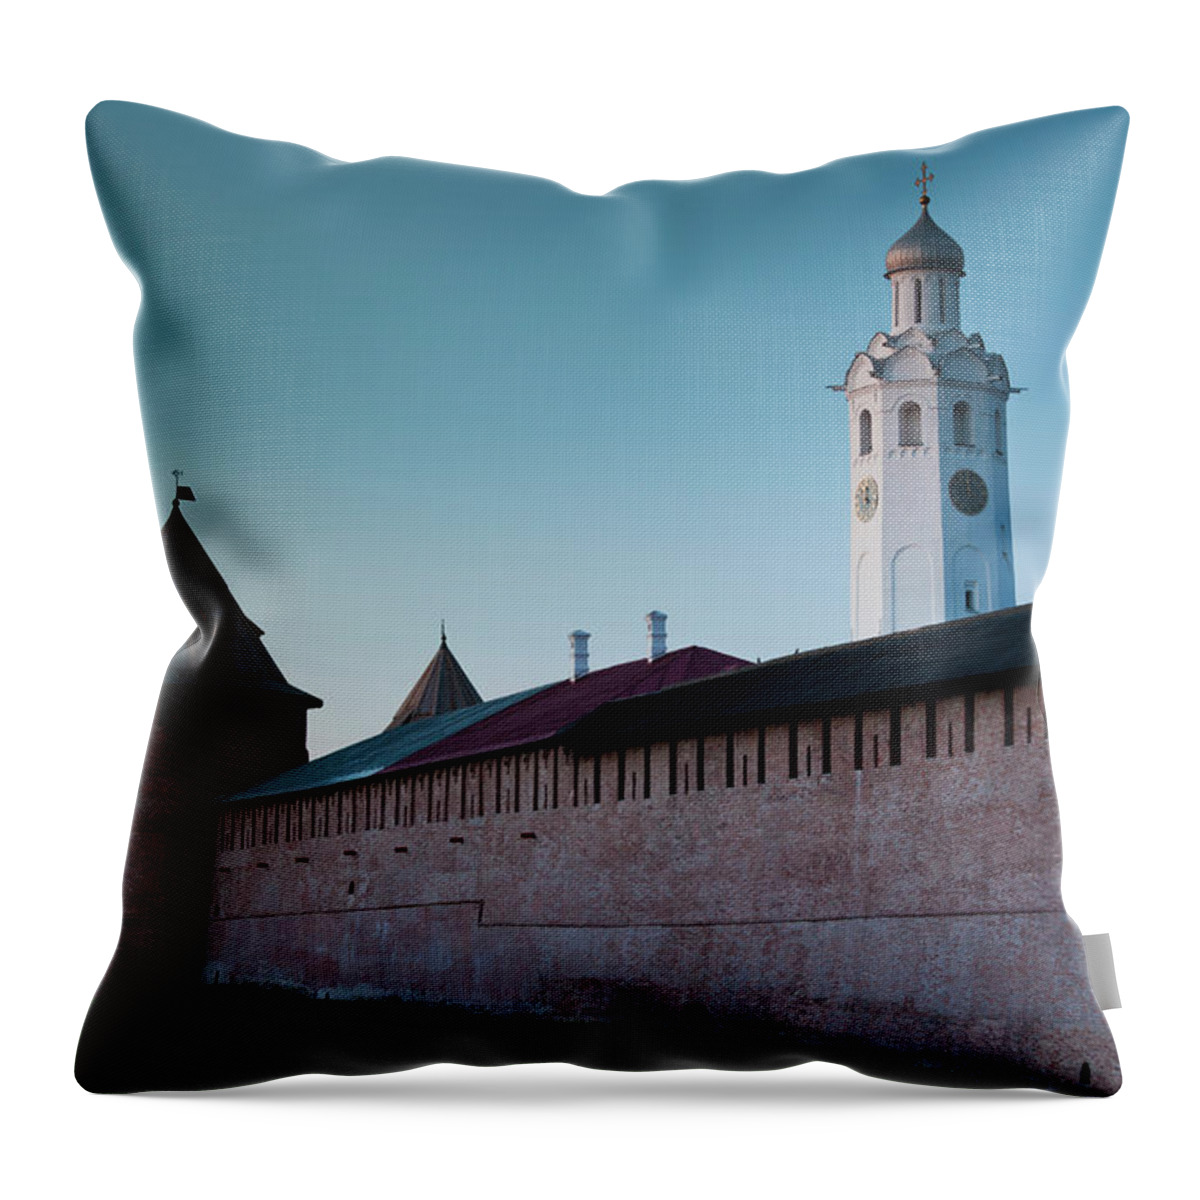 Tranquility Throw Pillow featuring the photograph Russia, Novgorod Oblast, Veliky Novgorod by Walter Bibikow